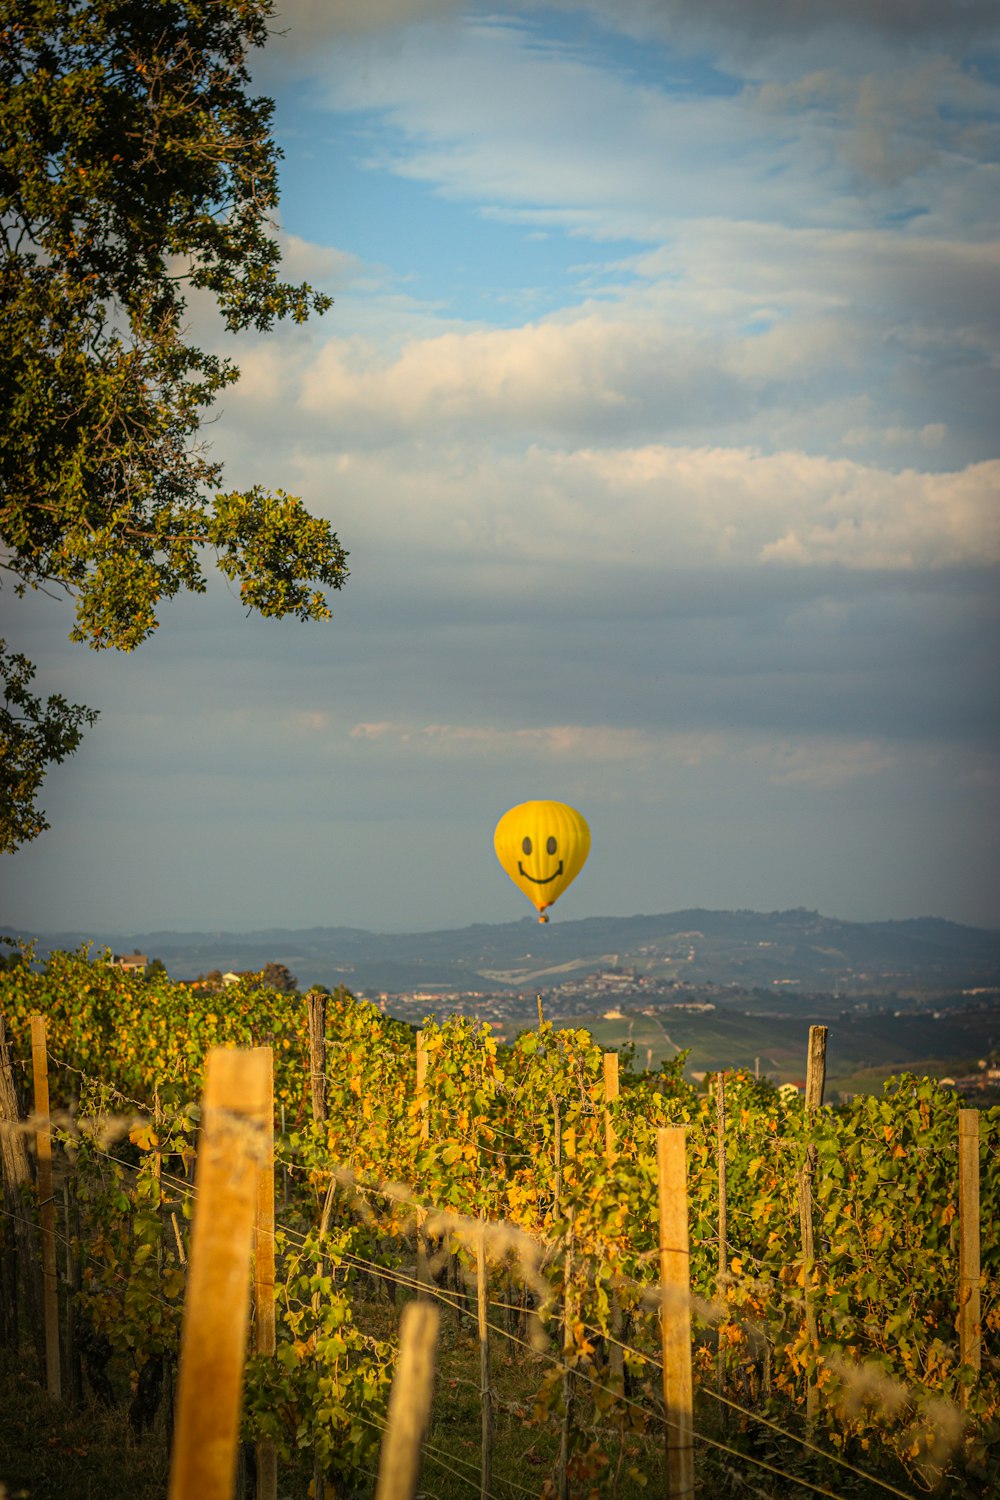 a yellow balloon with a smiley face is flying over a vineyard